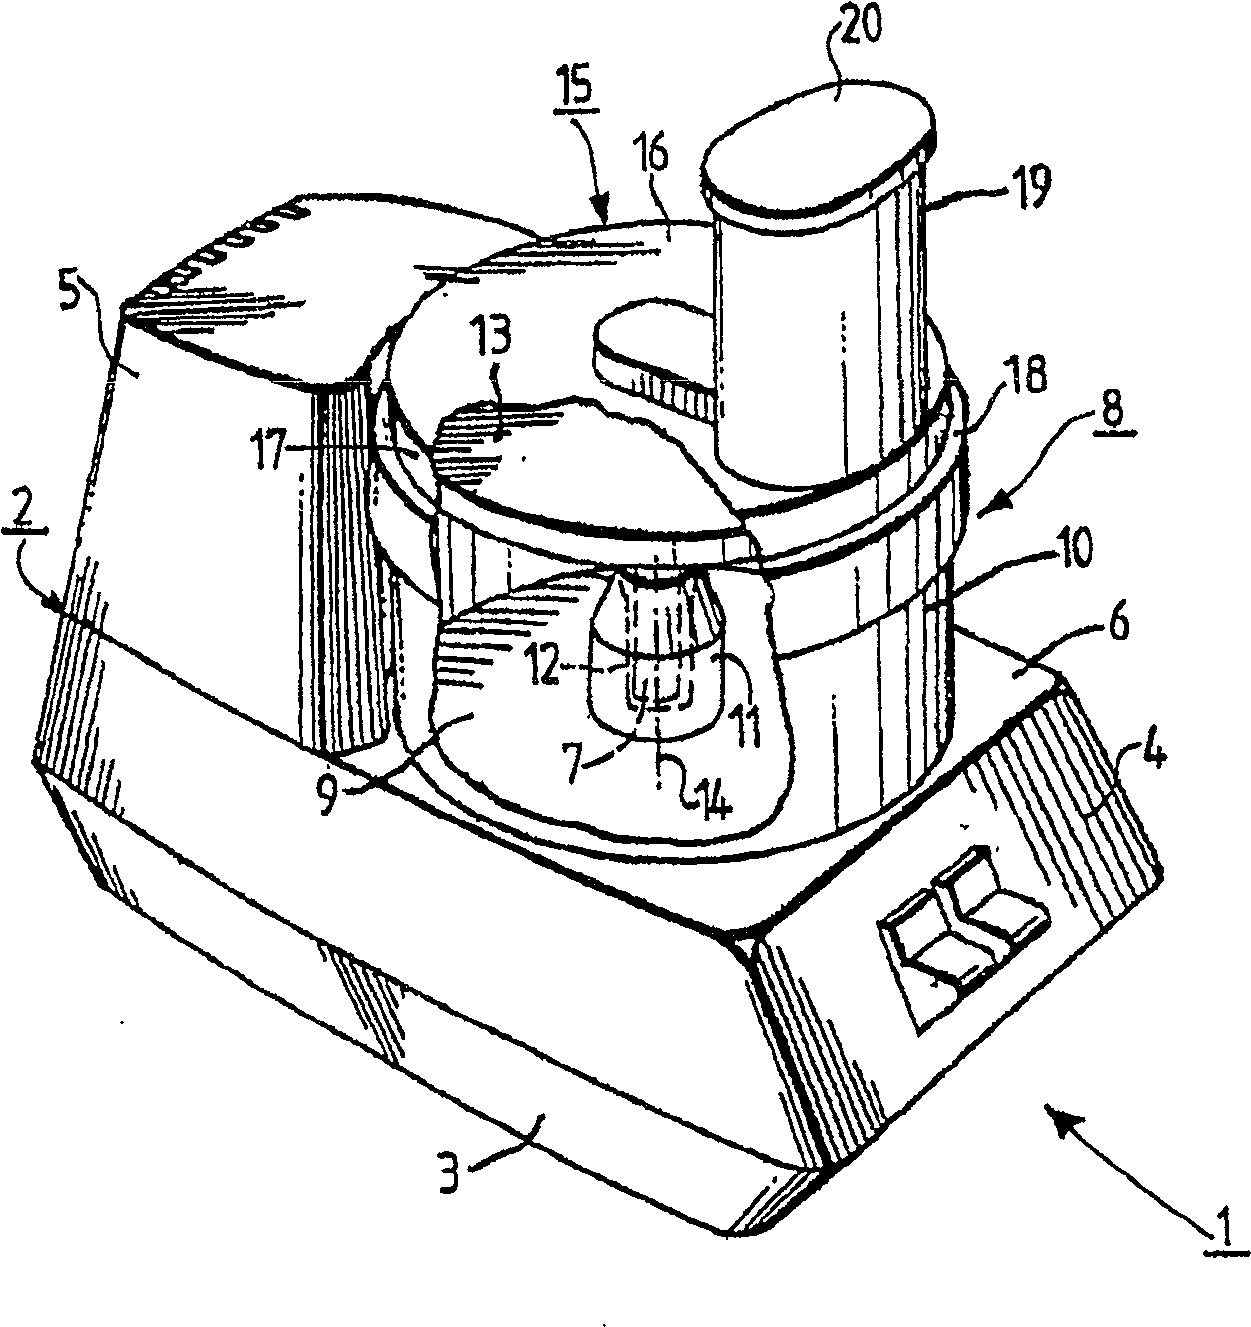 Food processor with tools combined to a tool unit